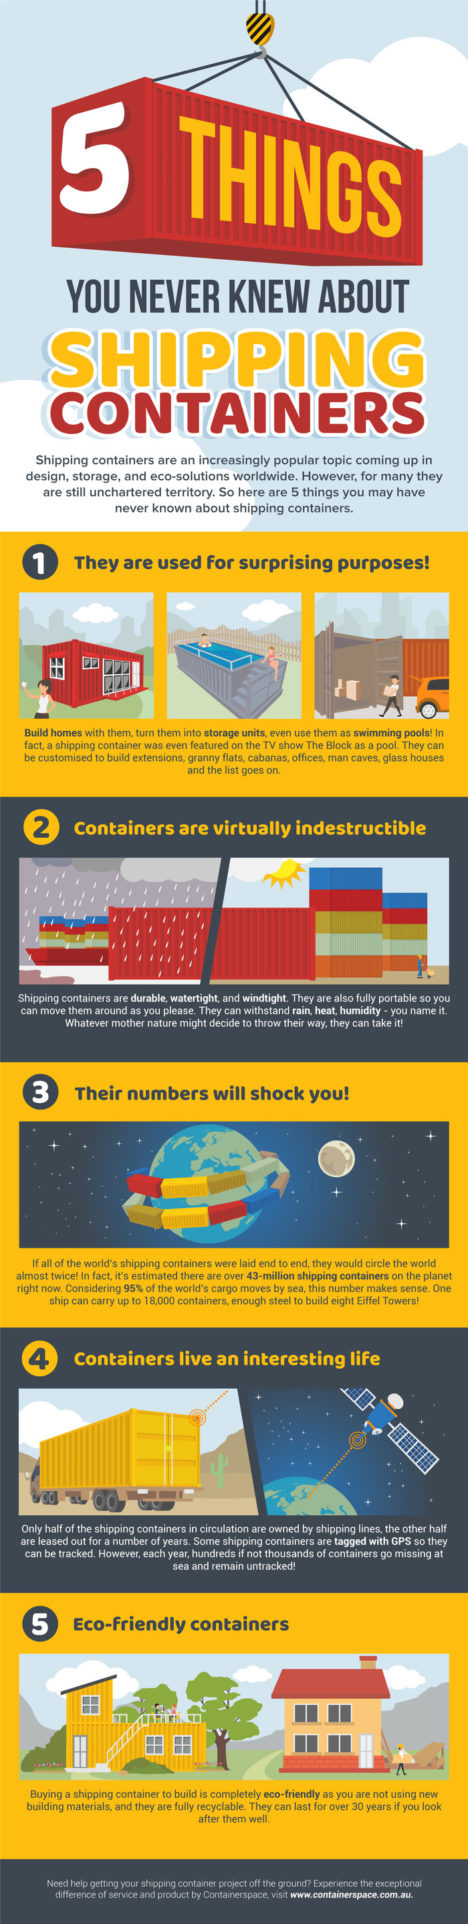 5 Fun Facts about Shipping Containers